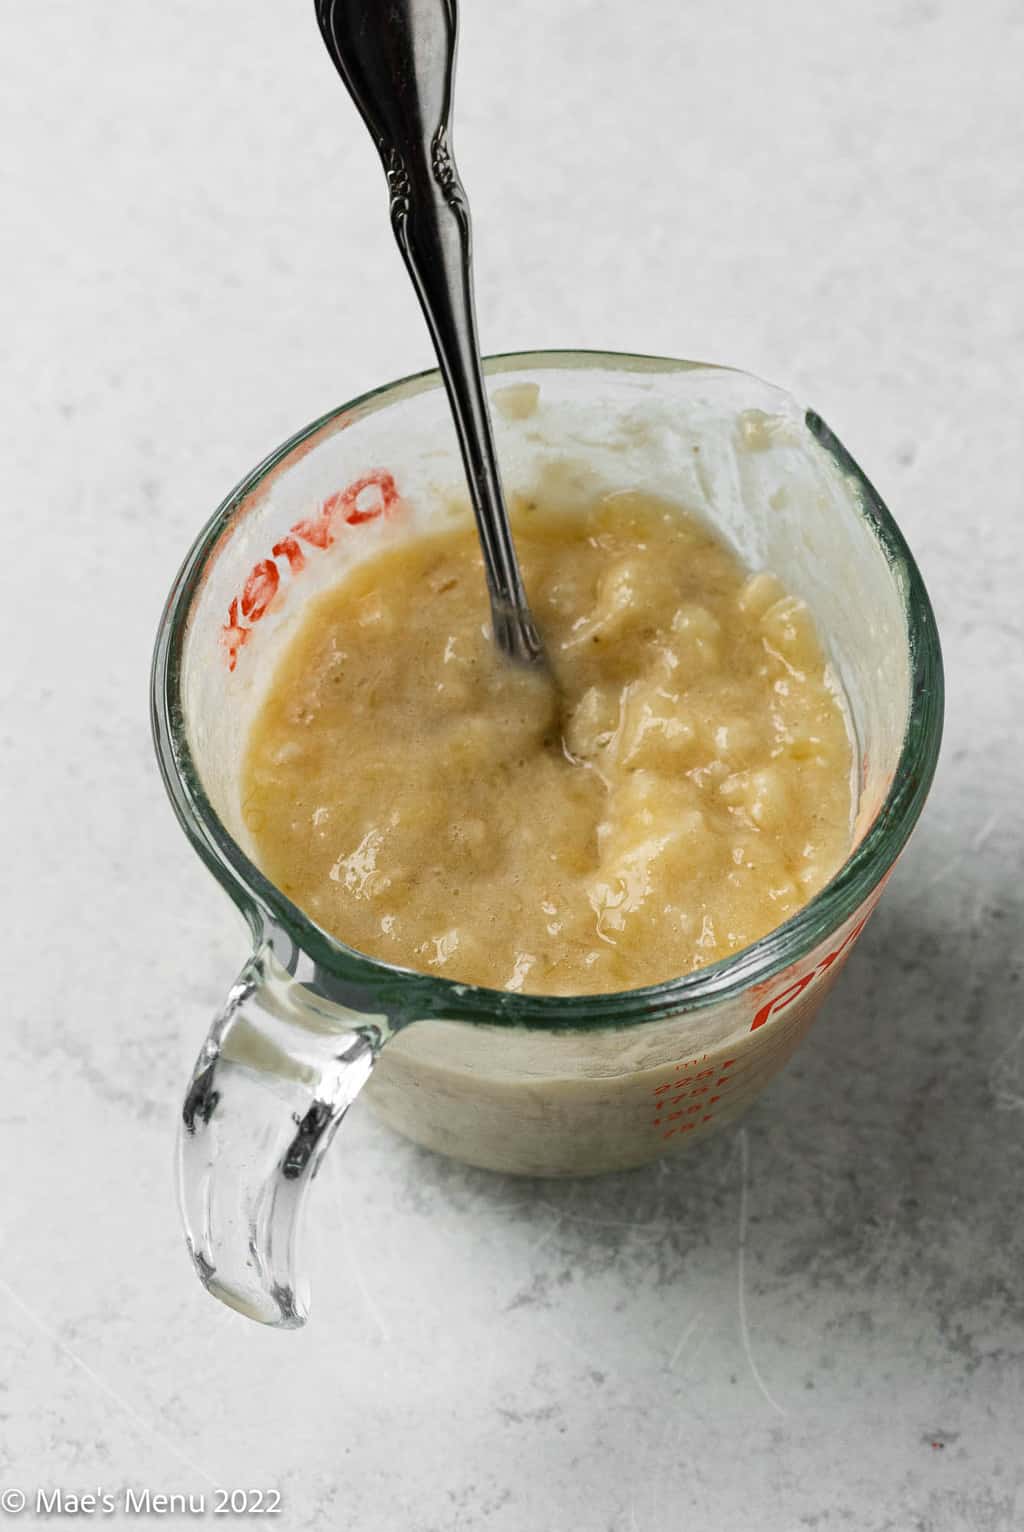 A measuring cup with mashed banana in it